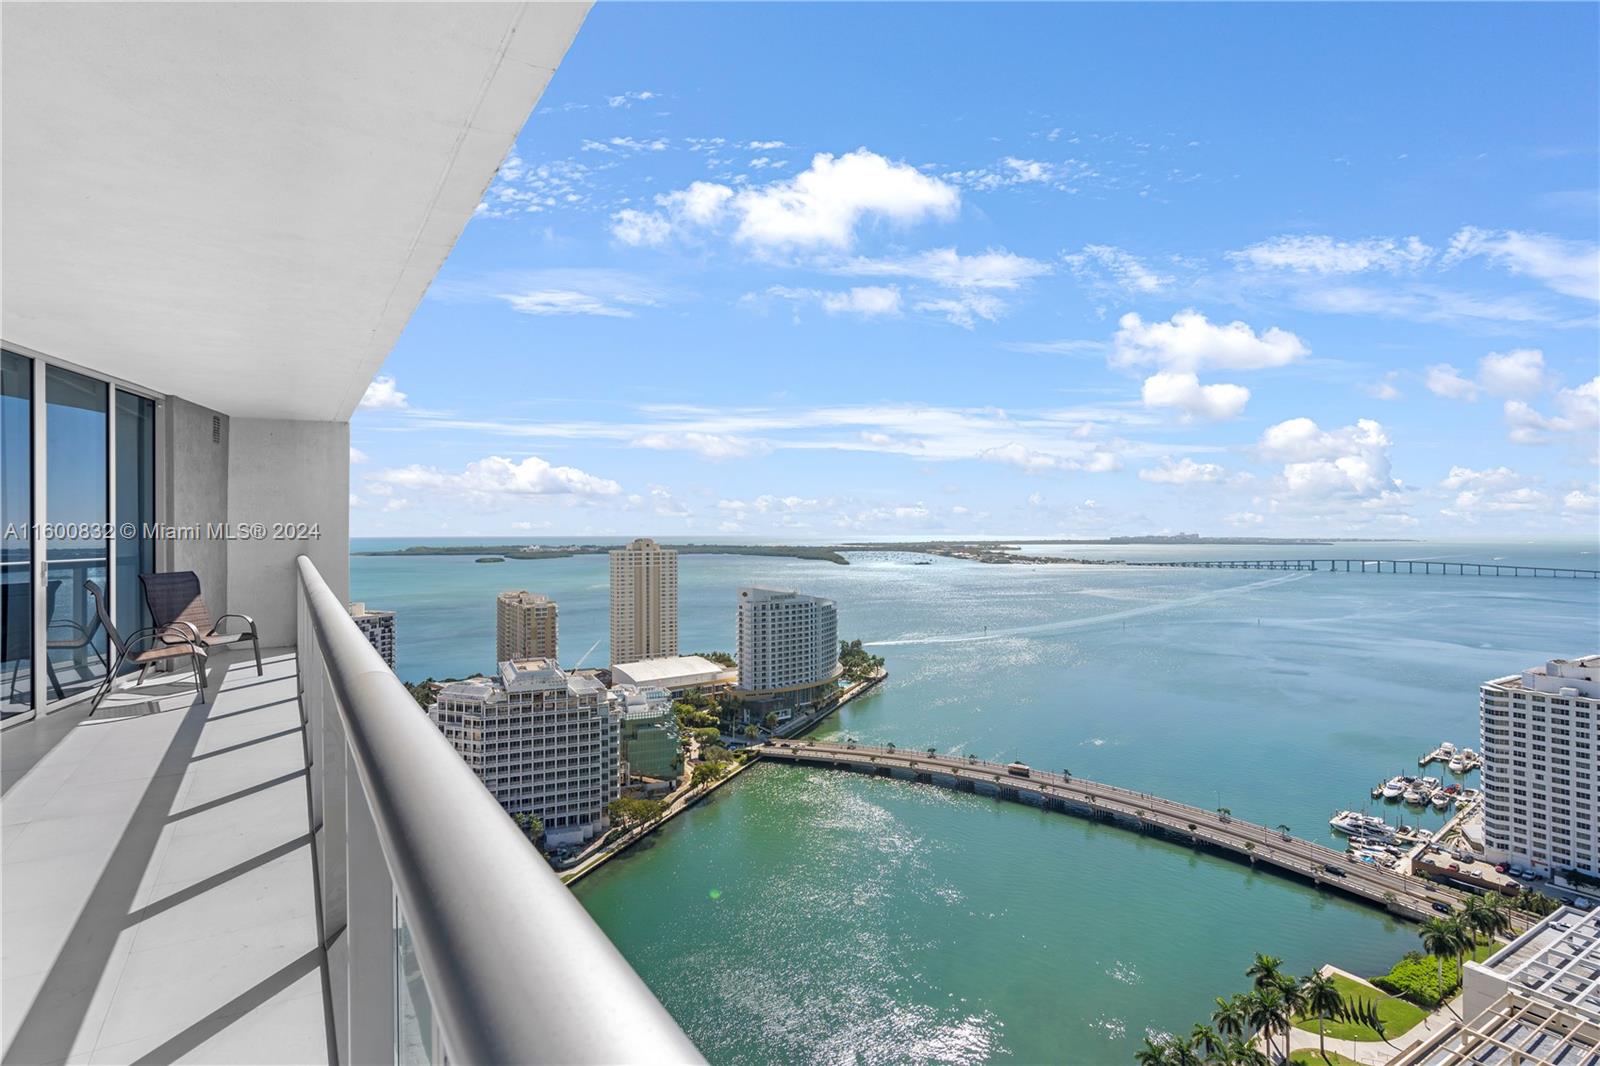 Furnished, contemporary 2-bed+Den, 2-Bath unit at the Icon Brickell II with endless bay & city views! Turnkey designer unit with white porcelain tile floors & stainless steel appliances. Enjoy amenities of a award-winning Spa designed by Philippe Starck: spoil yourself with yoga, spinning and pilates classes, treatments, and sauna. Capture postcard sunrises and sunsets from your high-floor balcony. Well-behaved pets ok. 6-month minimum. AVAILABLE AUGUST 5, 2024.